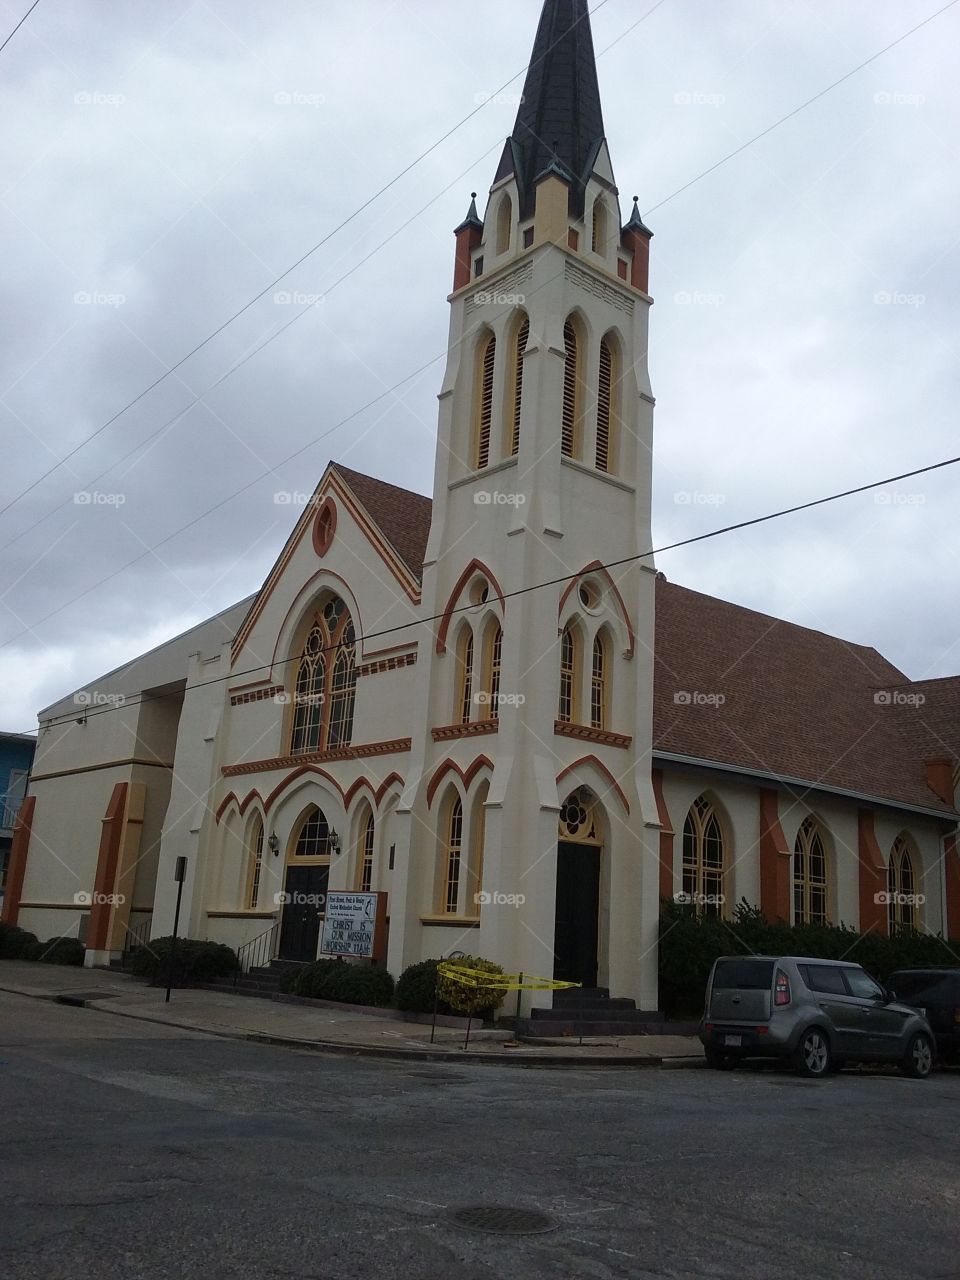 The 100 Year Old Church